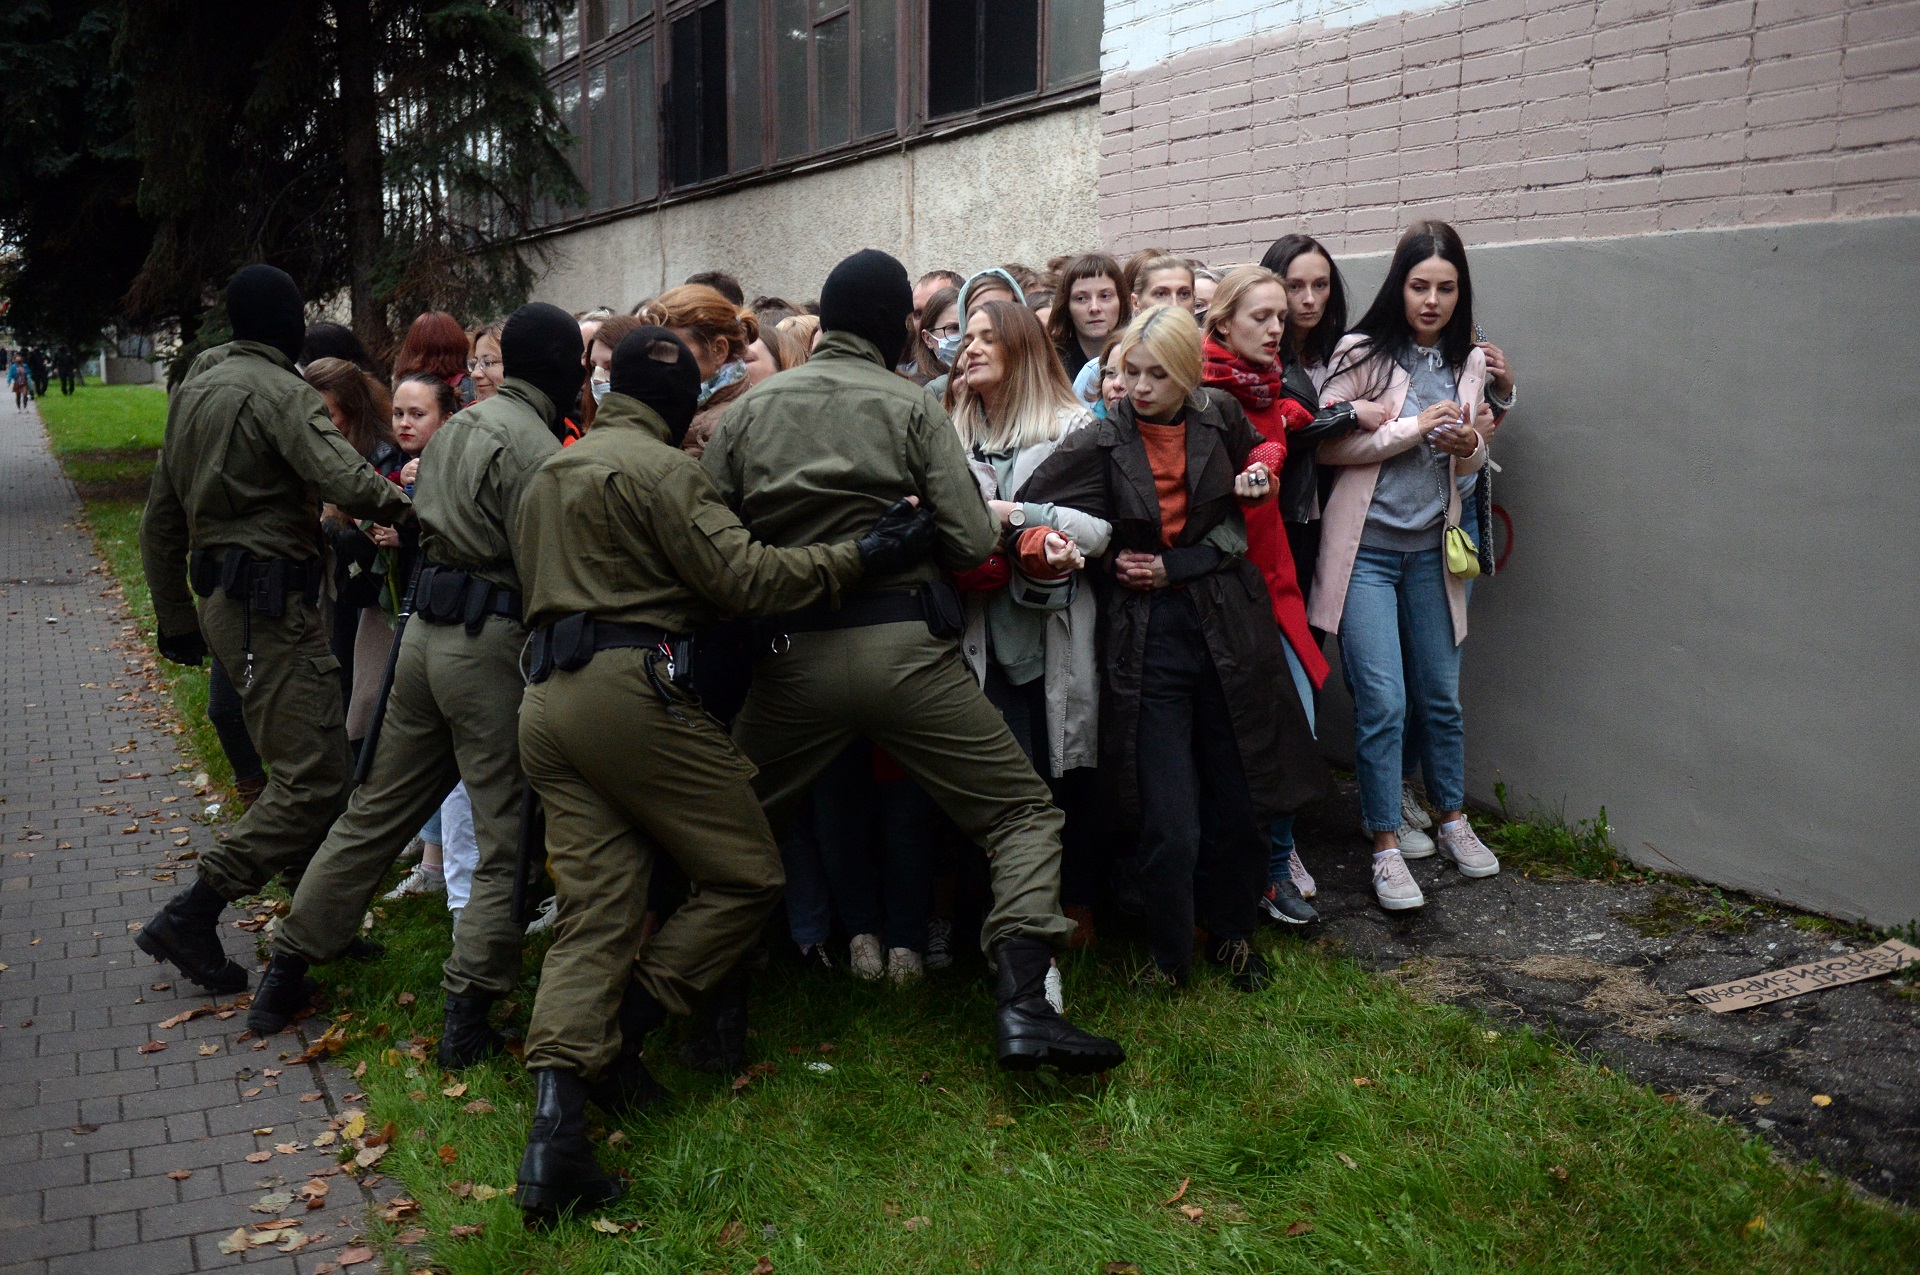 epa08654994 Belarus women, opposition activists resist the police attempt to detain them, as they gathered to support their current leader Maria Kolesnikova, in Minsk, Belarus, 08 September 2020. According to media reports citing eyewitnesses and fellow campaign members, Kolesnikova was detained by unidentified persons in Minsk on 07 September and taken to the border with Ukraine early 08 September to be deported, which she reportedly refused by ripping up her passport. The Belarusian State Border Committee confirmed the detention of Maria Kolesnikova on the border.  EPA/STRINGER